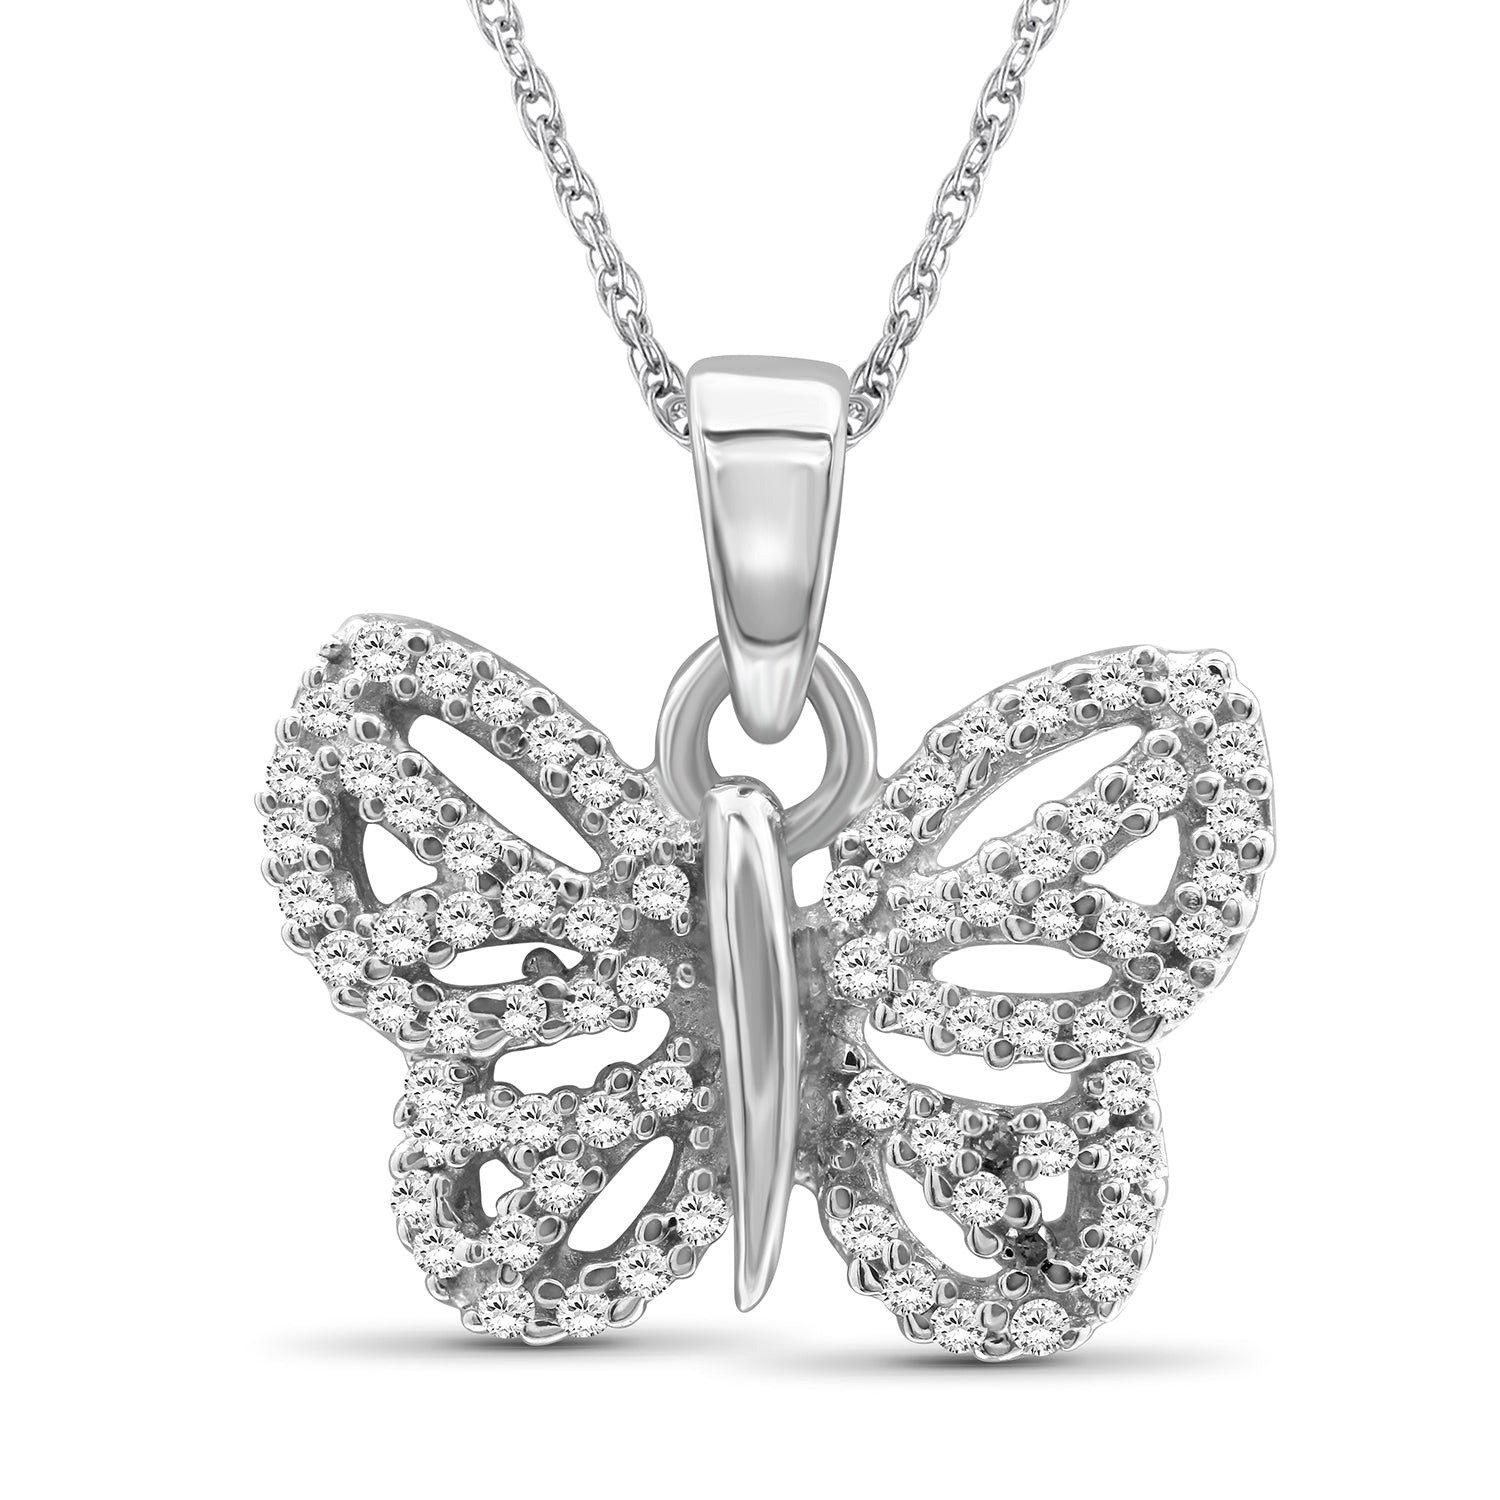 0.25 Carat White Diamond Butterfly Necklace Sterling Silver Necklace for Women – Genuine White Diamond Necklace with Durable . 925 Sterling Silver Chain – Beautiful Butterfly Pendant Necklace Gifts for Women